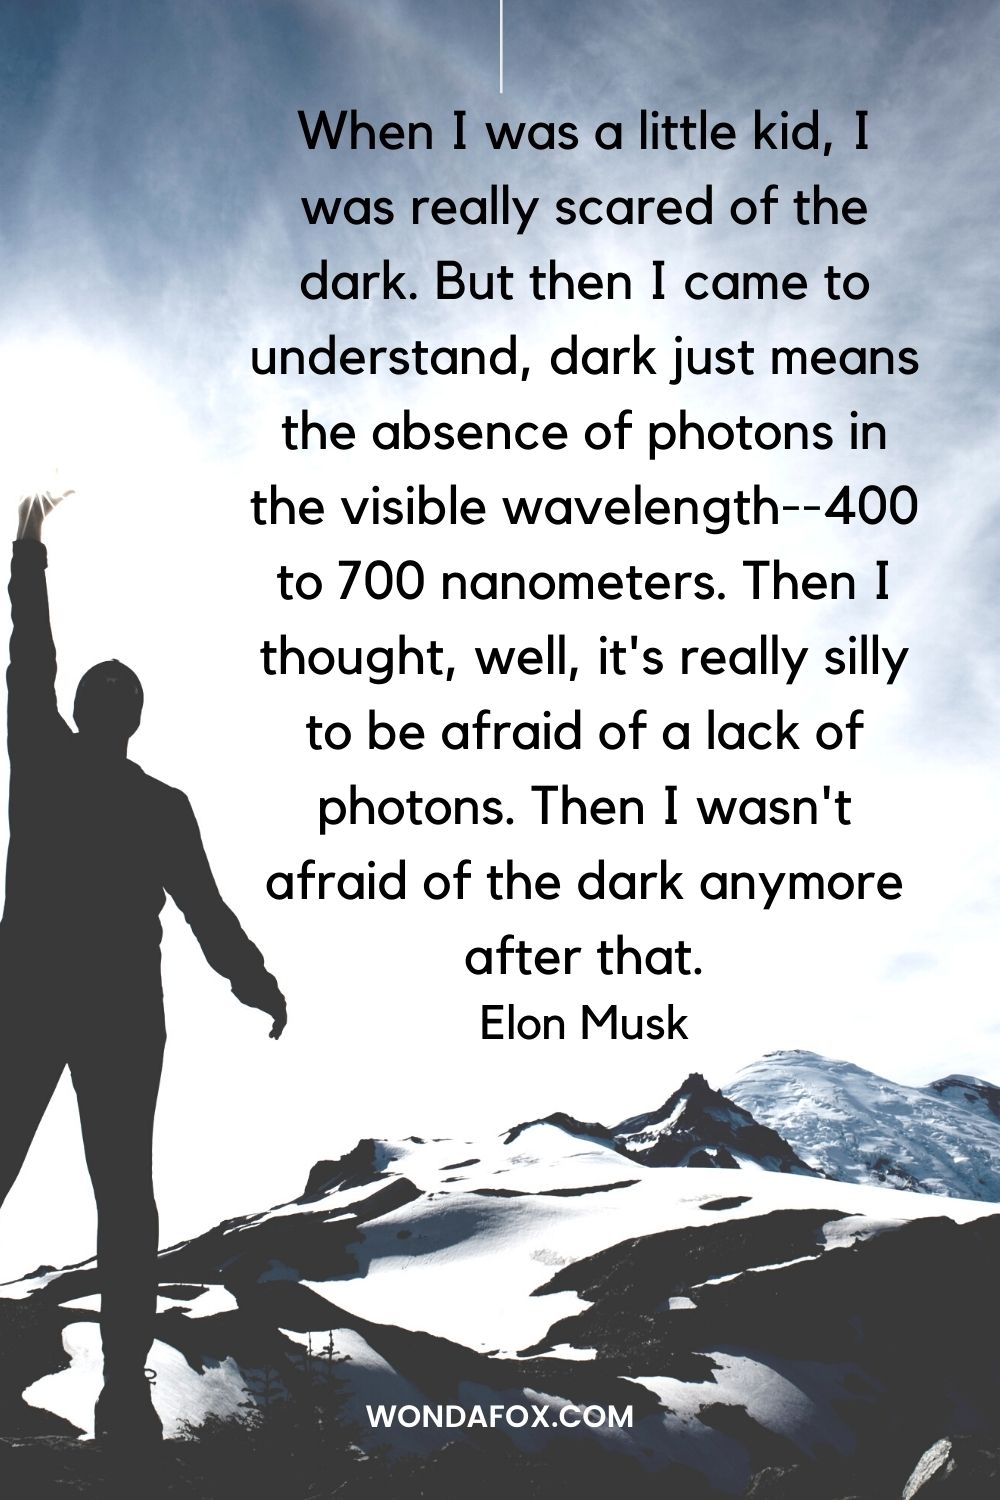 When I was a little kid, I was really scared of the dark. But then I came to understand, dark just means the absence of photons in the visible wavelength--400 to 700 nanometers. Then I thought, well, it's really silly to be afraid of a lack of photons. Then I wasn't afraid of the dark anymore after that.